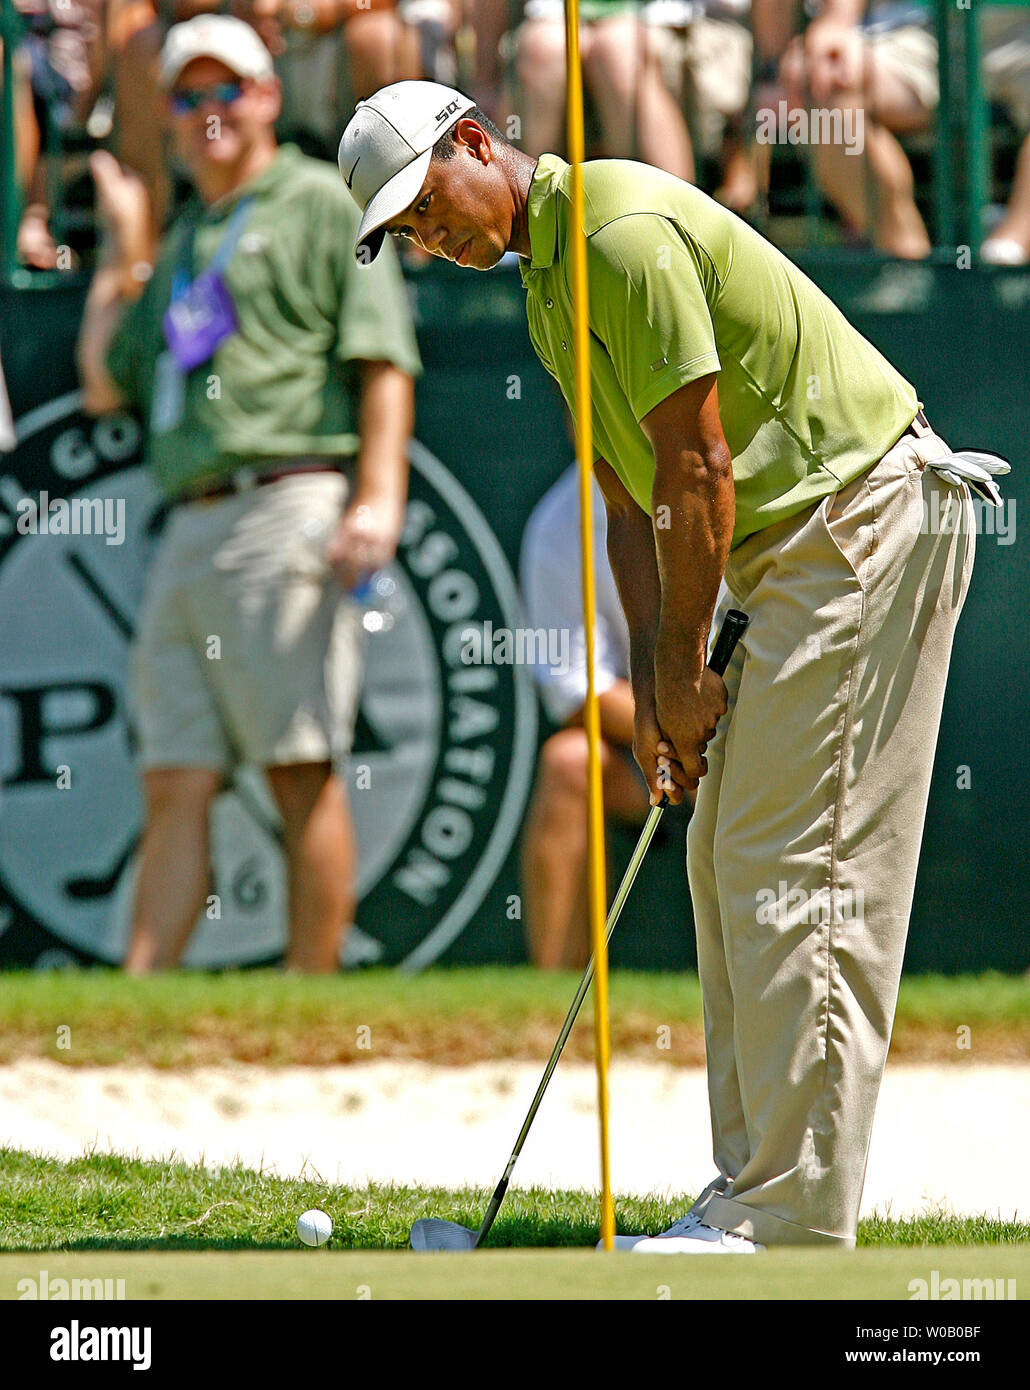 Leader Tiger Woods chips from the fringe onto the third green during the third round of the 89th PGA Championship at Southern Hills Country Club in Tulsa, Oklahoma on August 11, 2007.   (UPI Photo/Gary C. Caskey) Stock Photo